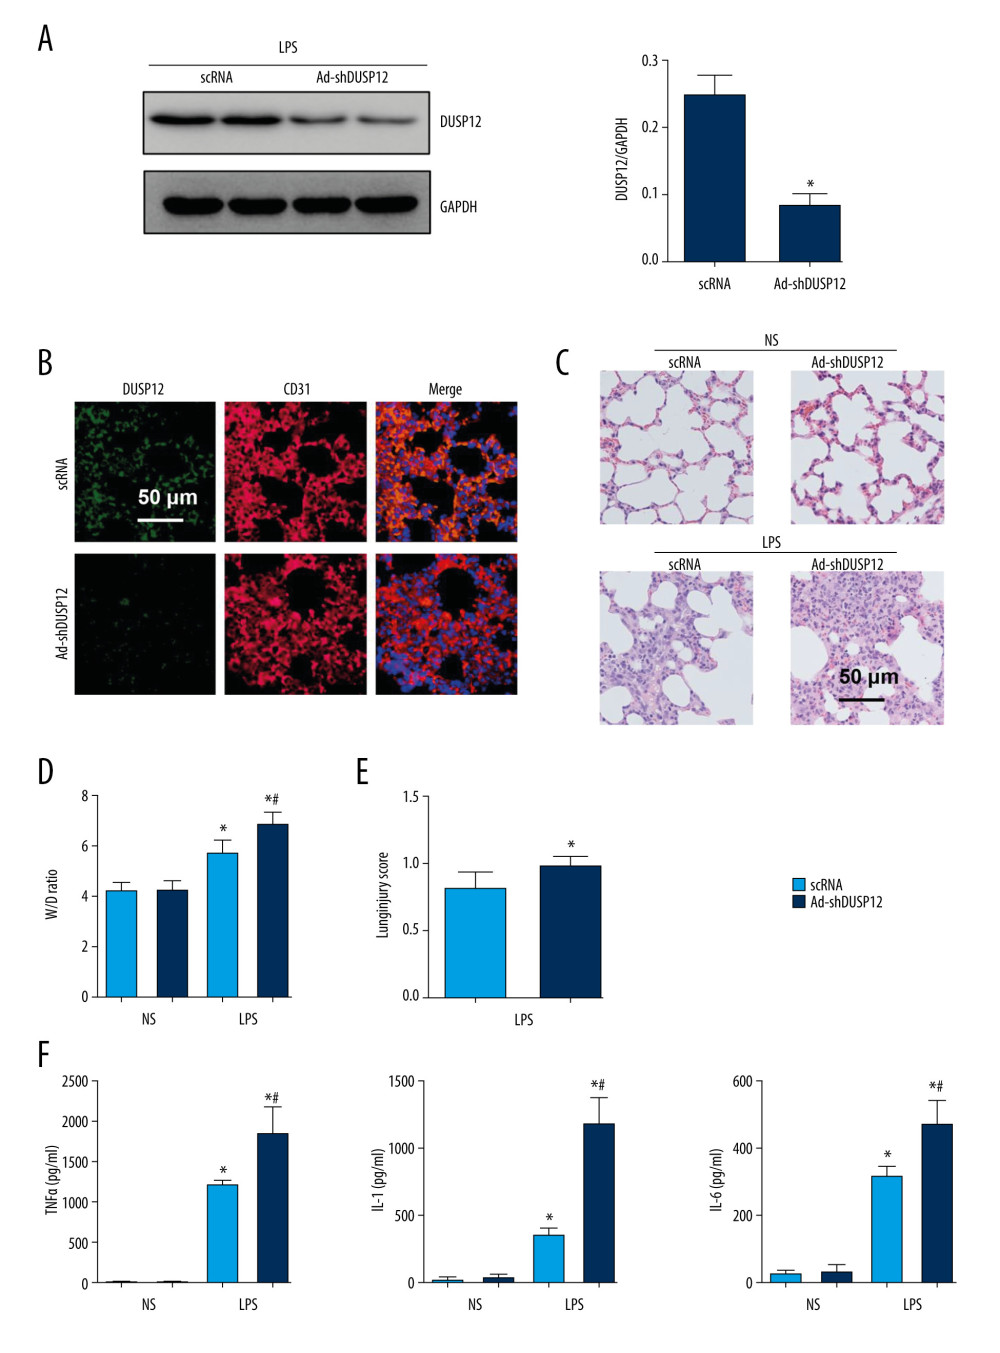 DUSP12 knockdown aggravated LPS-induced lung injury in mice. (A) Protein level of DUSP12 in mouse lung tissue 42 h after Ad-shDUSP12 injection (n=6). (B) Immunofluorescence staining of CD31 and DUSP12 after Ad-shDUSP12 injection (n=5, magnification: 400). (C) H&E staining (n=5, magnification: 200). (D) Lung wet weight/dry weight ratio (W/D ratio) (n=10). (E) Lung injury score (n=6). (F) Proinflammatory factor levels in alveolar lavage fluid as measured by ELISA (n=6) (* P<0.05 vs ScRNA/NS; # P<0.05 vs ScRNA/LPS).